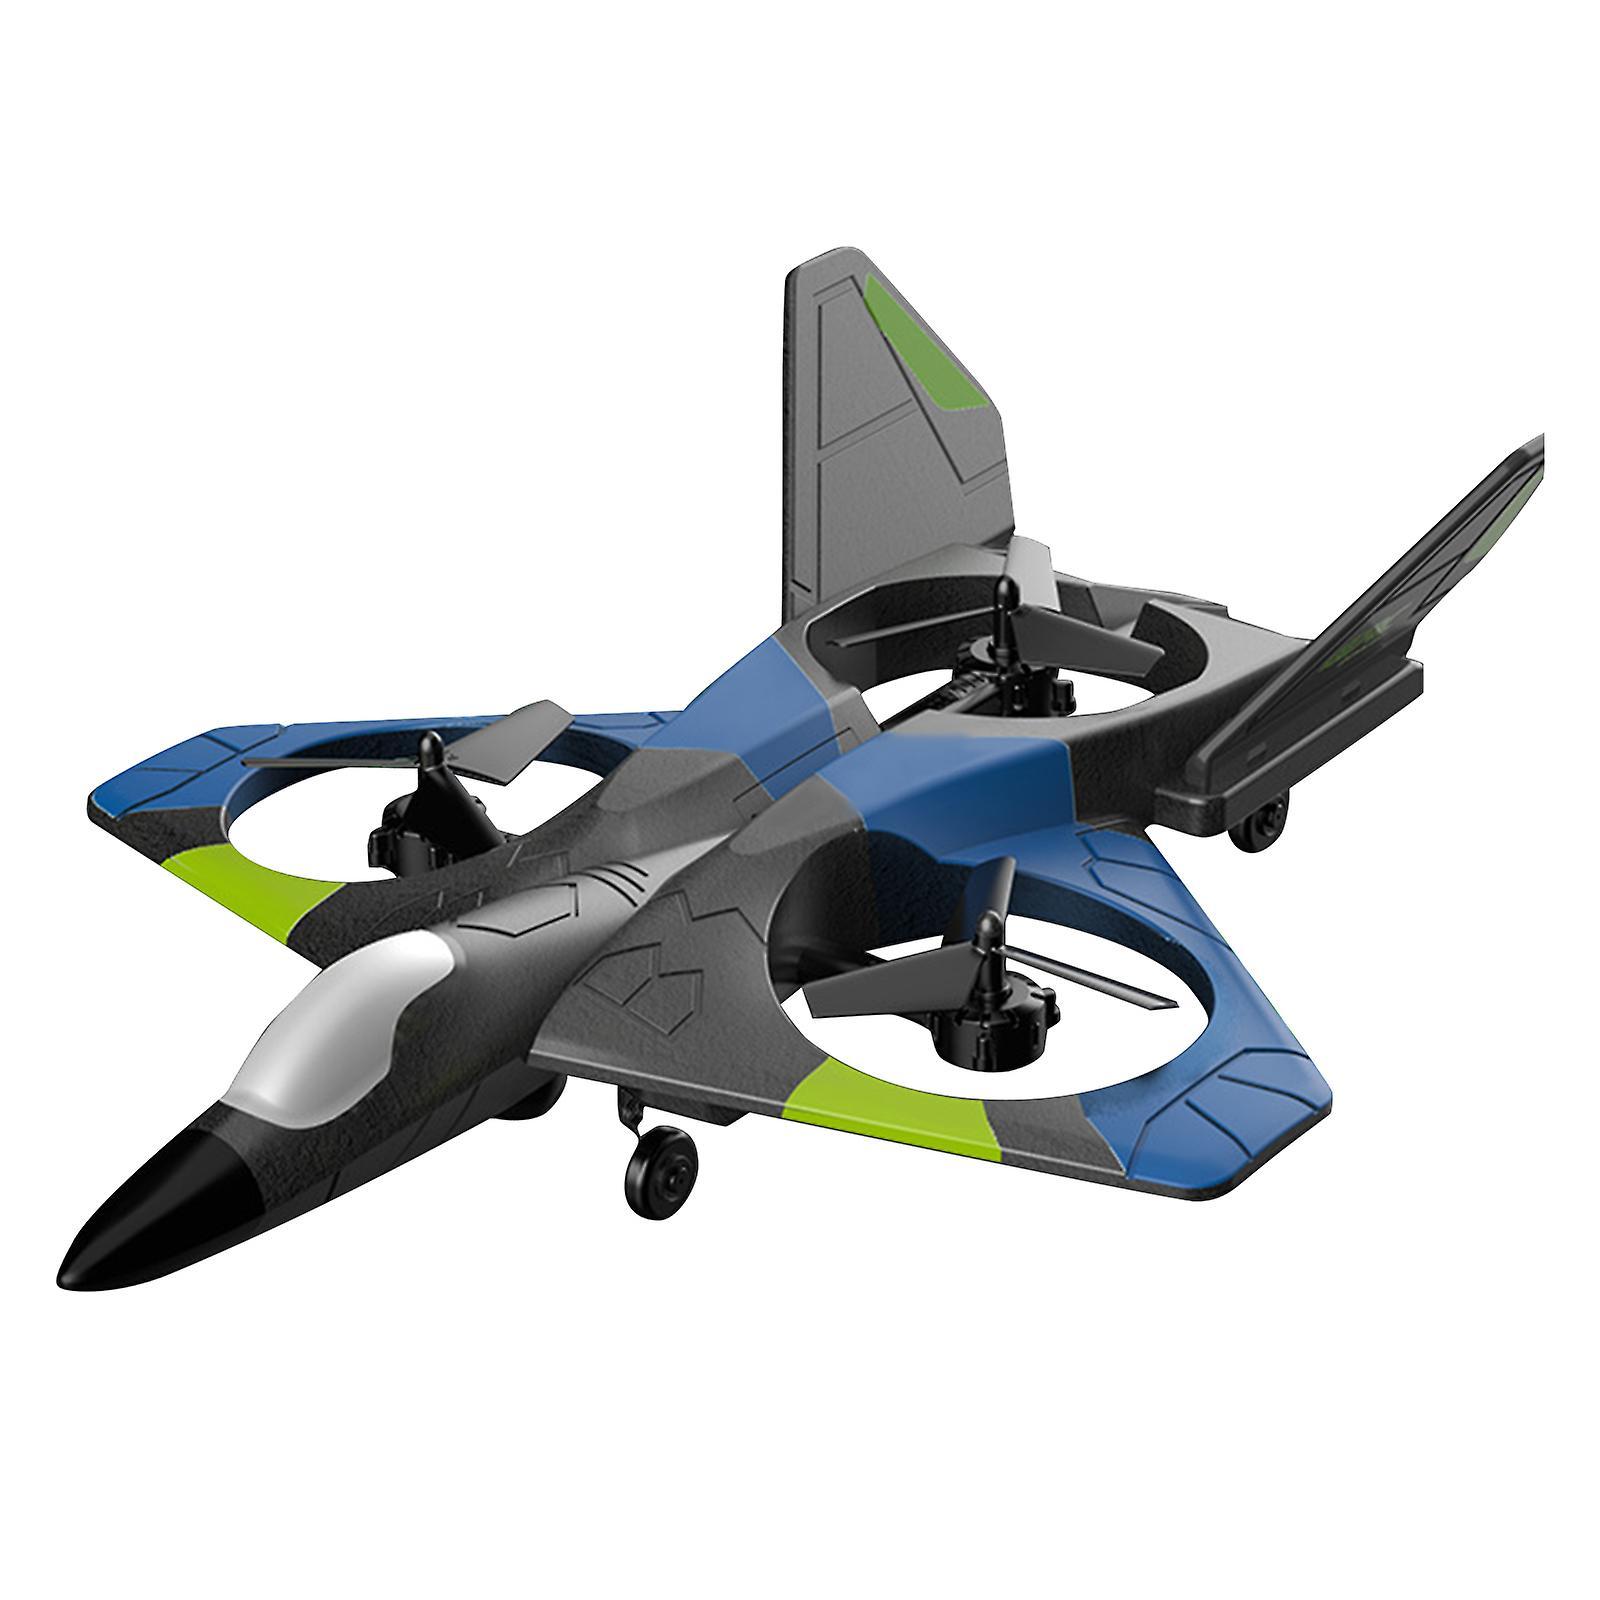 Remote Control Airplane With 360 Stunt Spin Remote & Light: Affordable and easily transportable: Where to buy your 360 stunt spin remote control airplane